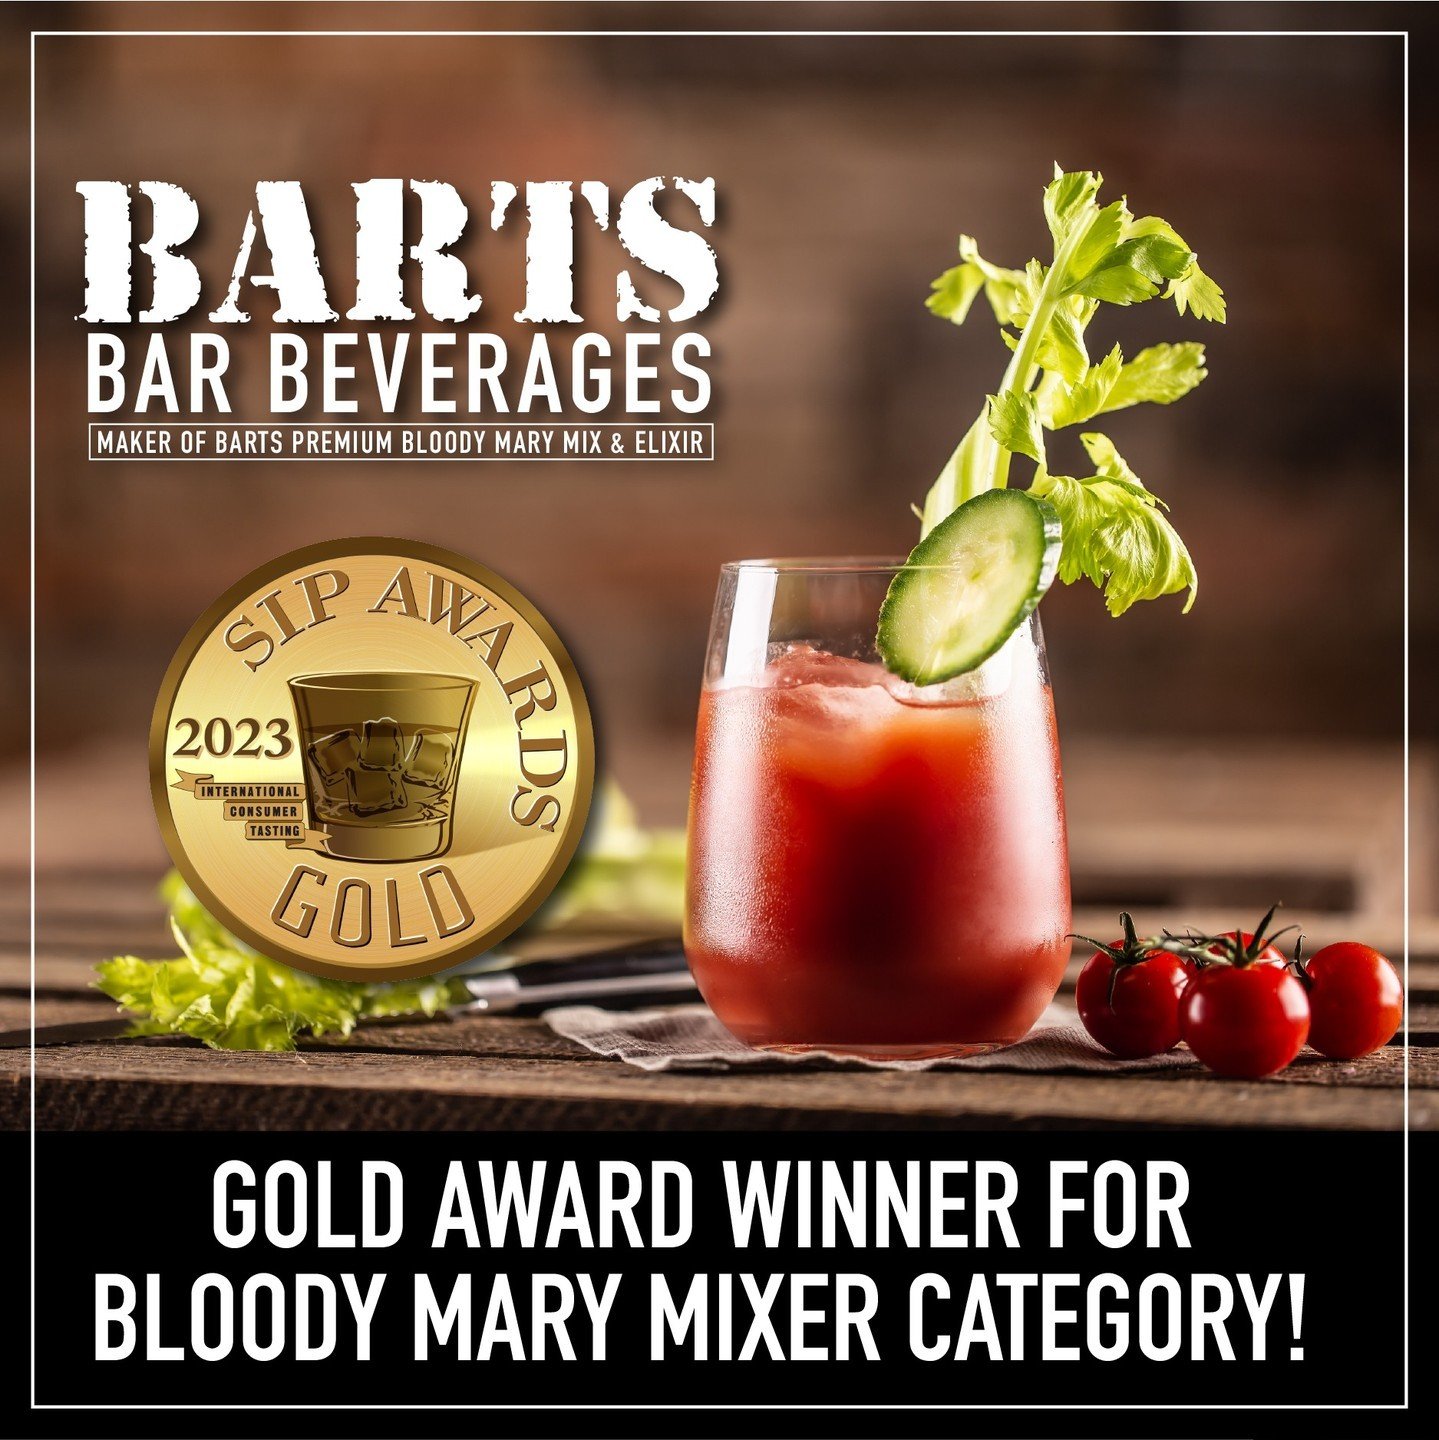 Try the award-winning Premium Barts Bloody Mary Mix! Available for home-delivery and in-stores. Shop our link in bio. #bartsbloodymary #betterbebarts #shopsmall #drinklocal #shoplocal #buylocal #shopsmallmidland #midlandtx #midlandia #westtexas #made